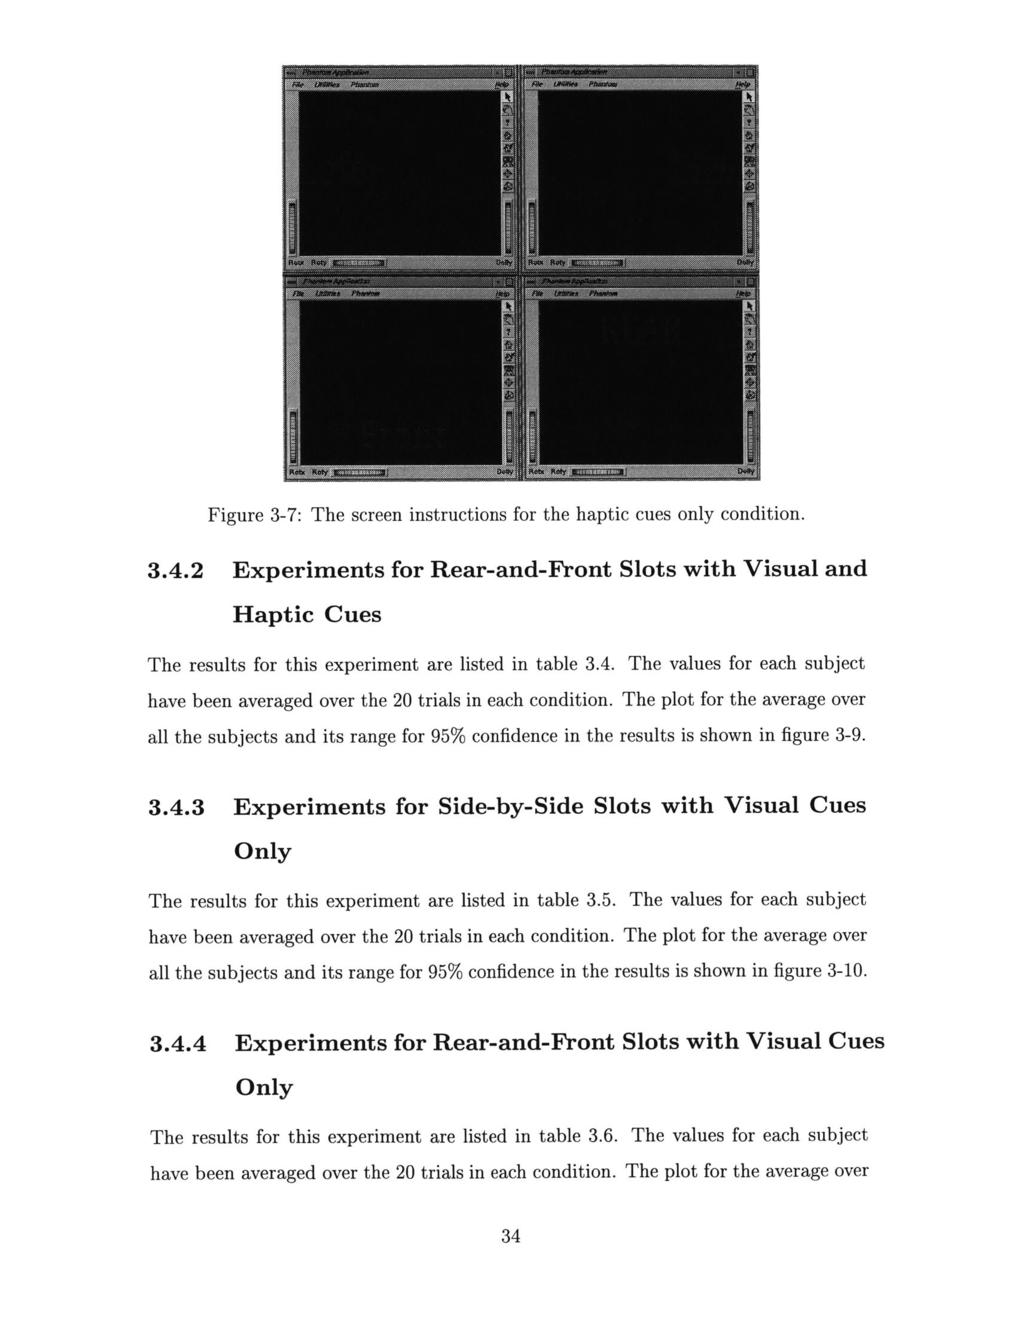 Figure 3-7: The screen instructions for the haptic cues only condition. 3.4.2 Experiments for Rear-and-Front Slots with Visual and Haptic Cues The results for this experiment are listed in table 3.4. The values for each subject have been averaged over the 20 trials in each condition.